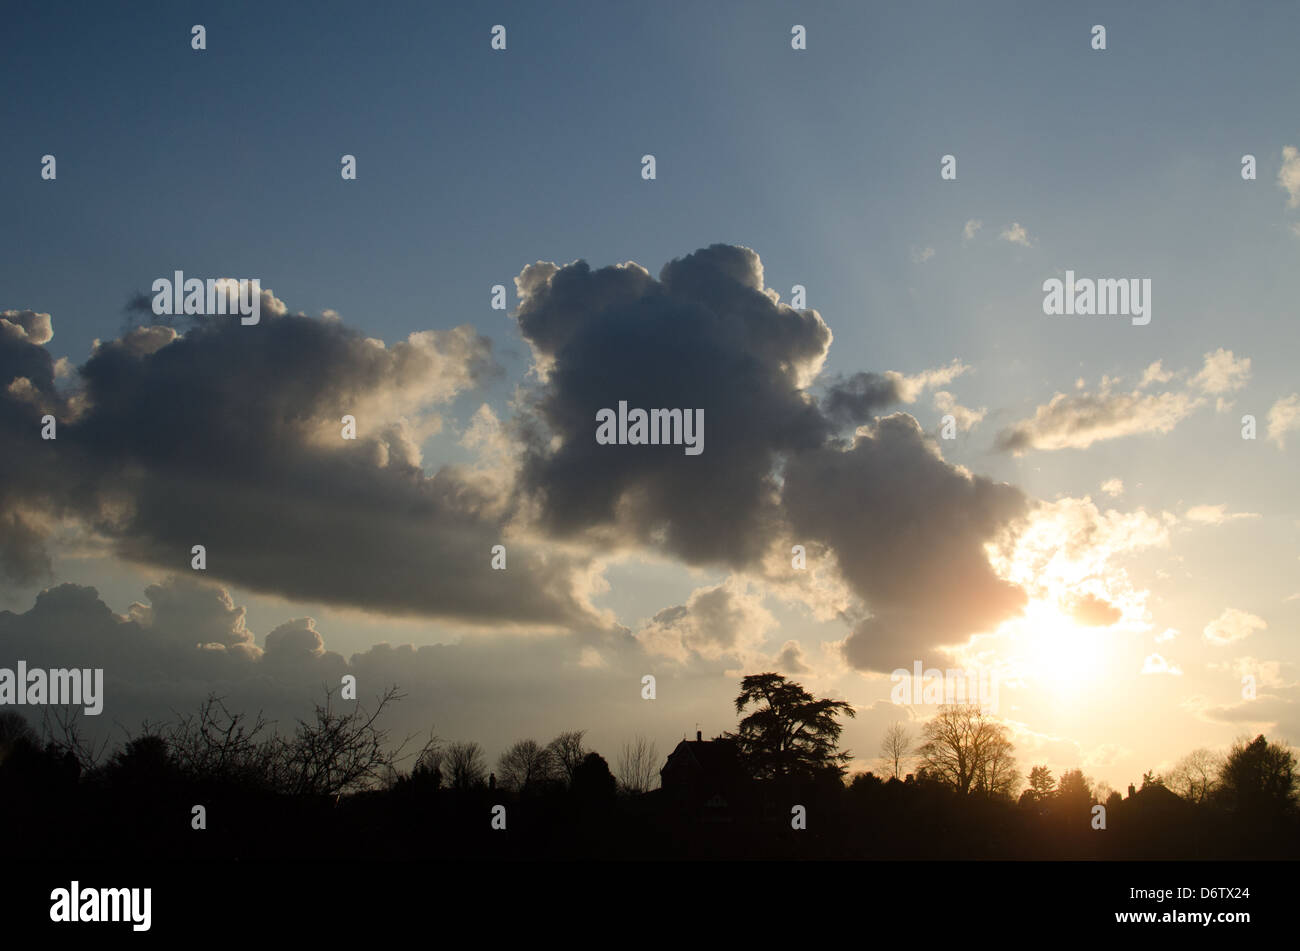 Poetic star shaped clouds in the sky. Stock Photo